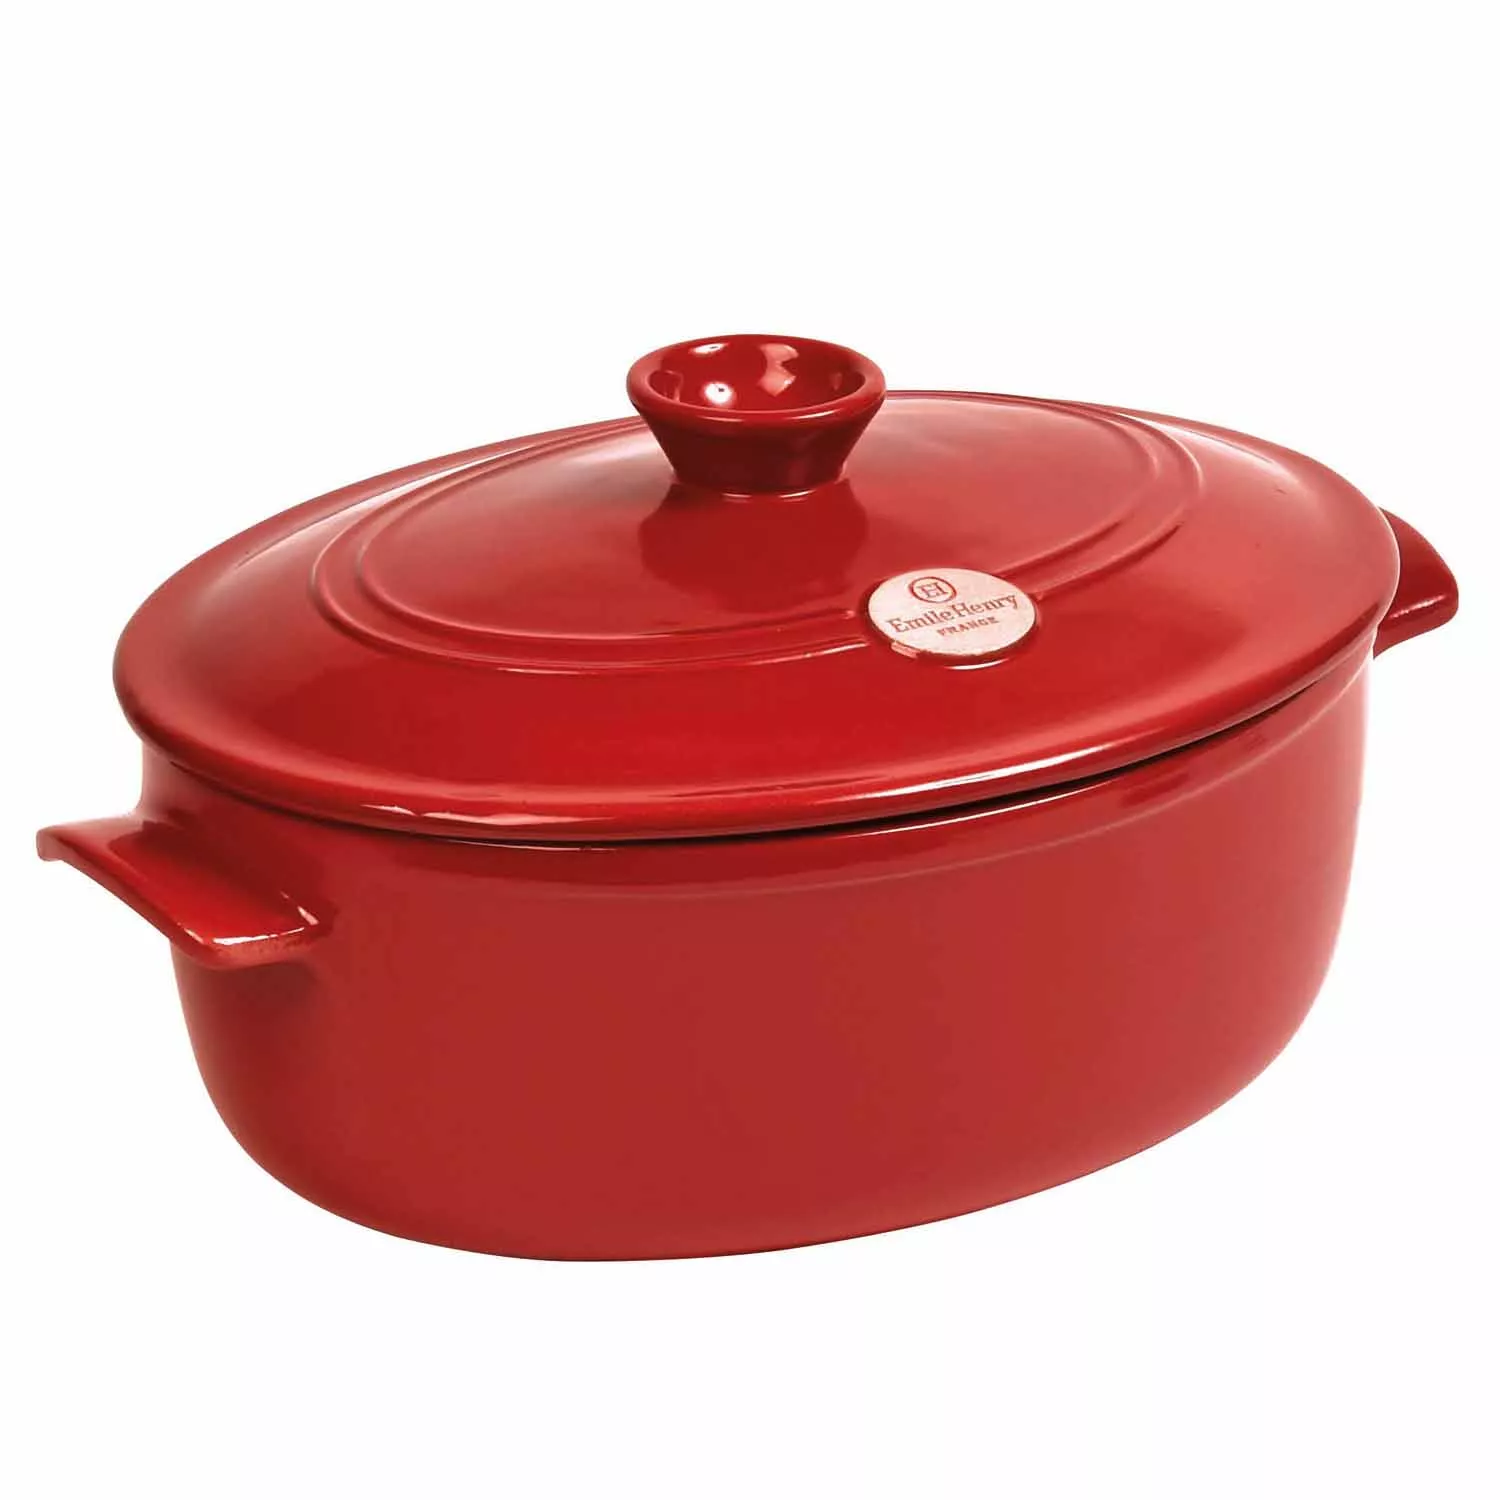 Oval Stewpot - Replacement Lid, Emile Henry USA